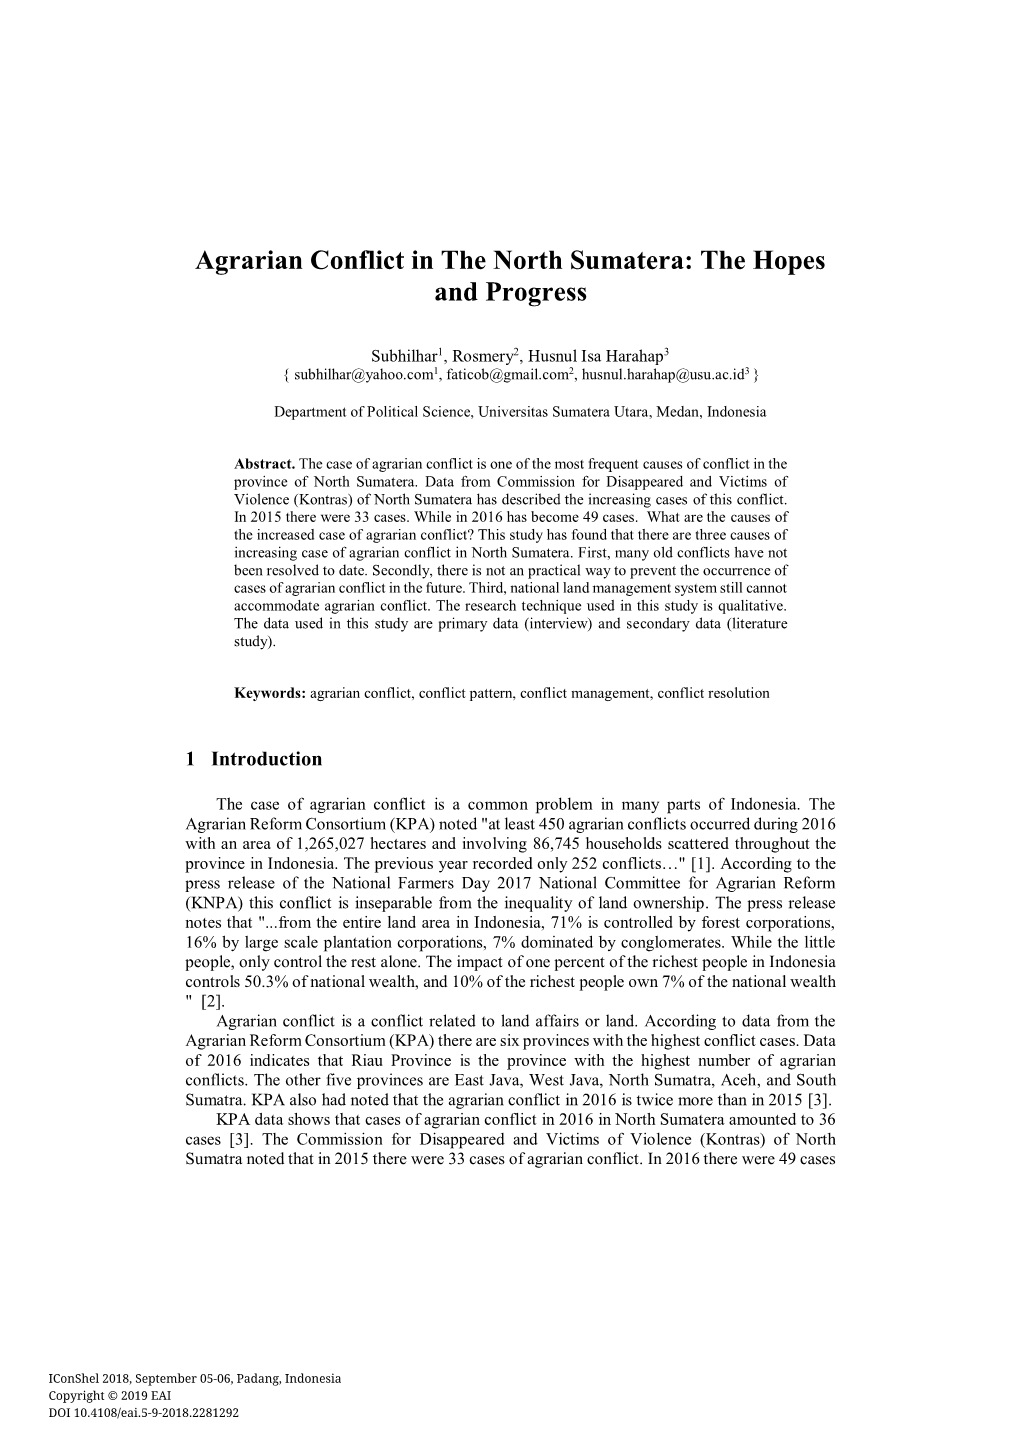 Agrarian Conflict in the North Sumatera: the Hopes and Progress